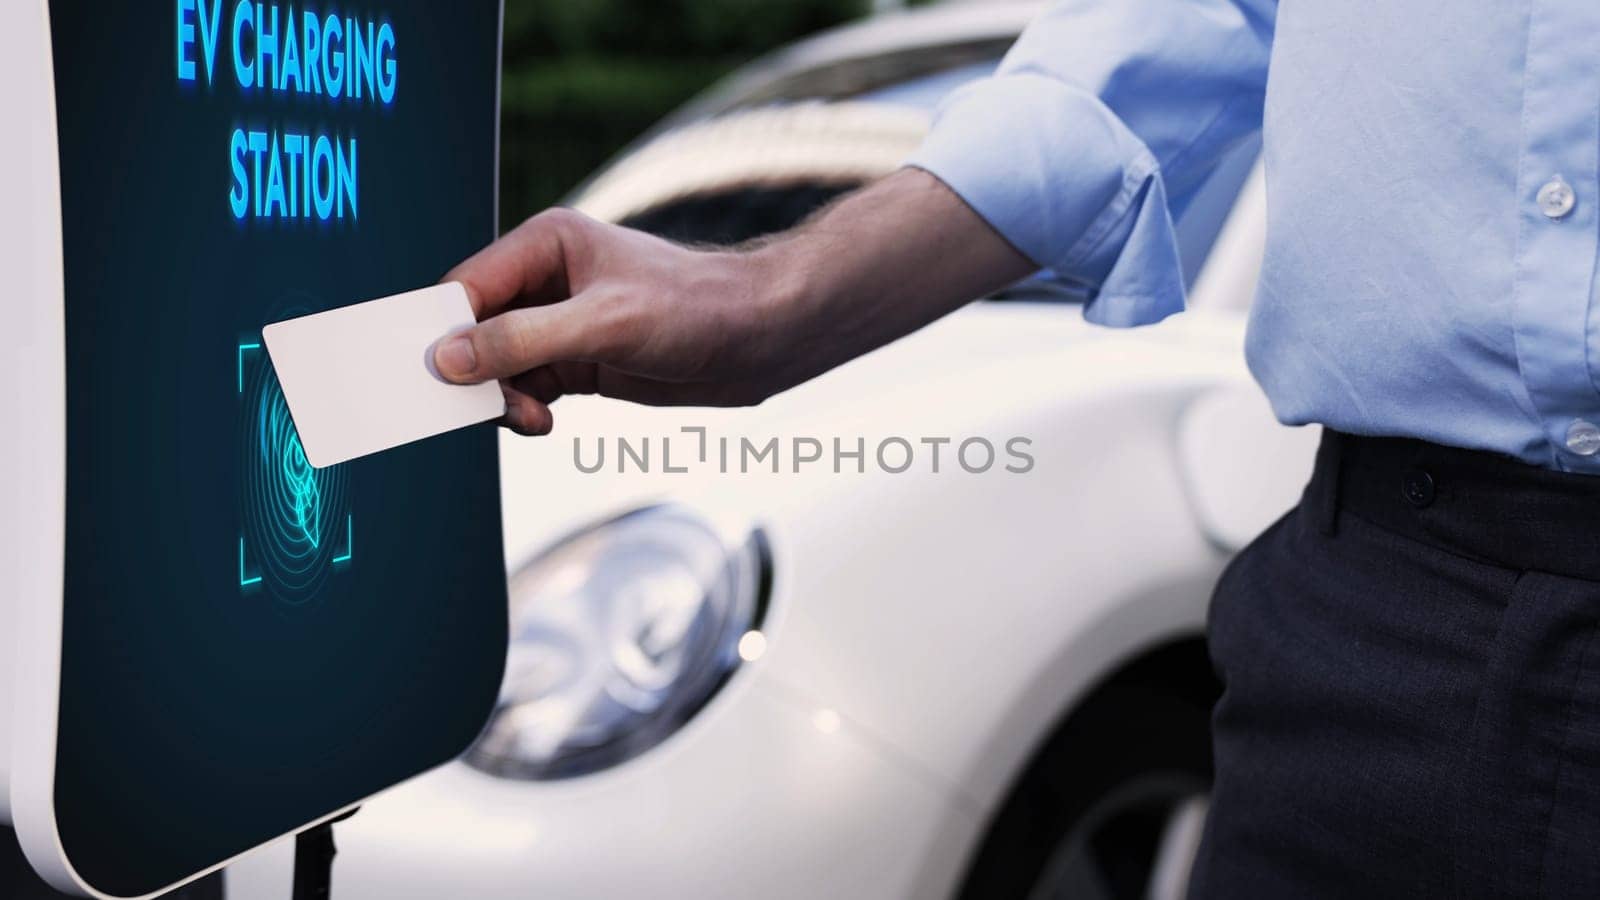 Businessman pay electric vehicle's eco-friendly and sustainable energy scanning credit card at charging station. Payment to power up his rechargeable electric vehicle at charging point. Peruse